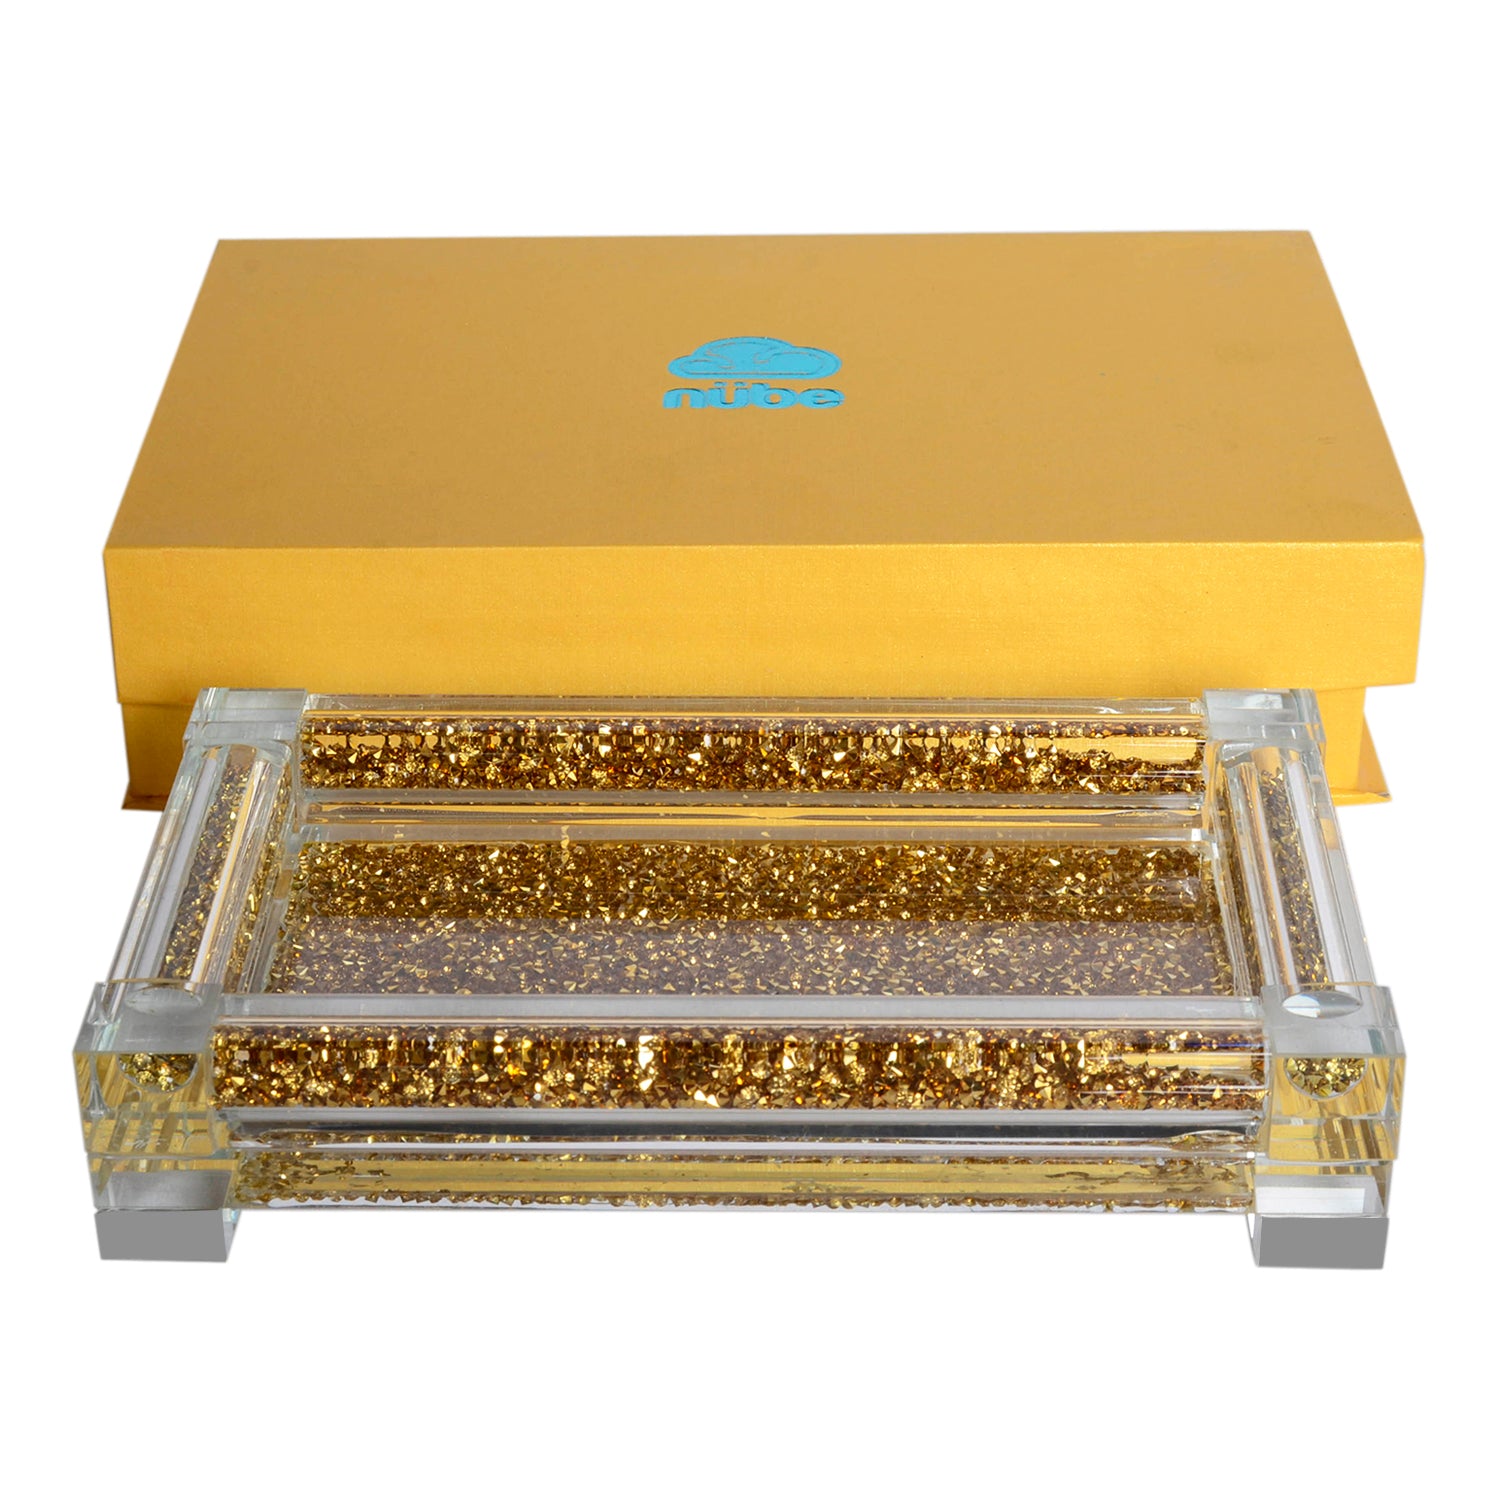 Ambrose Exquisite Small Glass Tray in Gift Box gold-glass